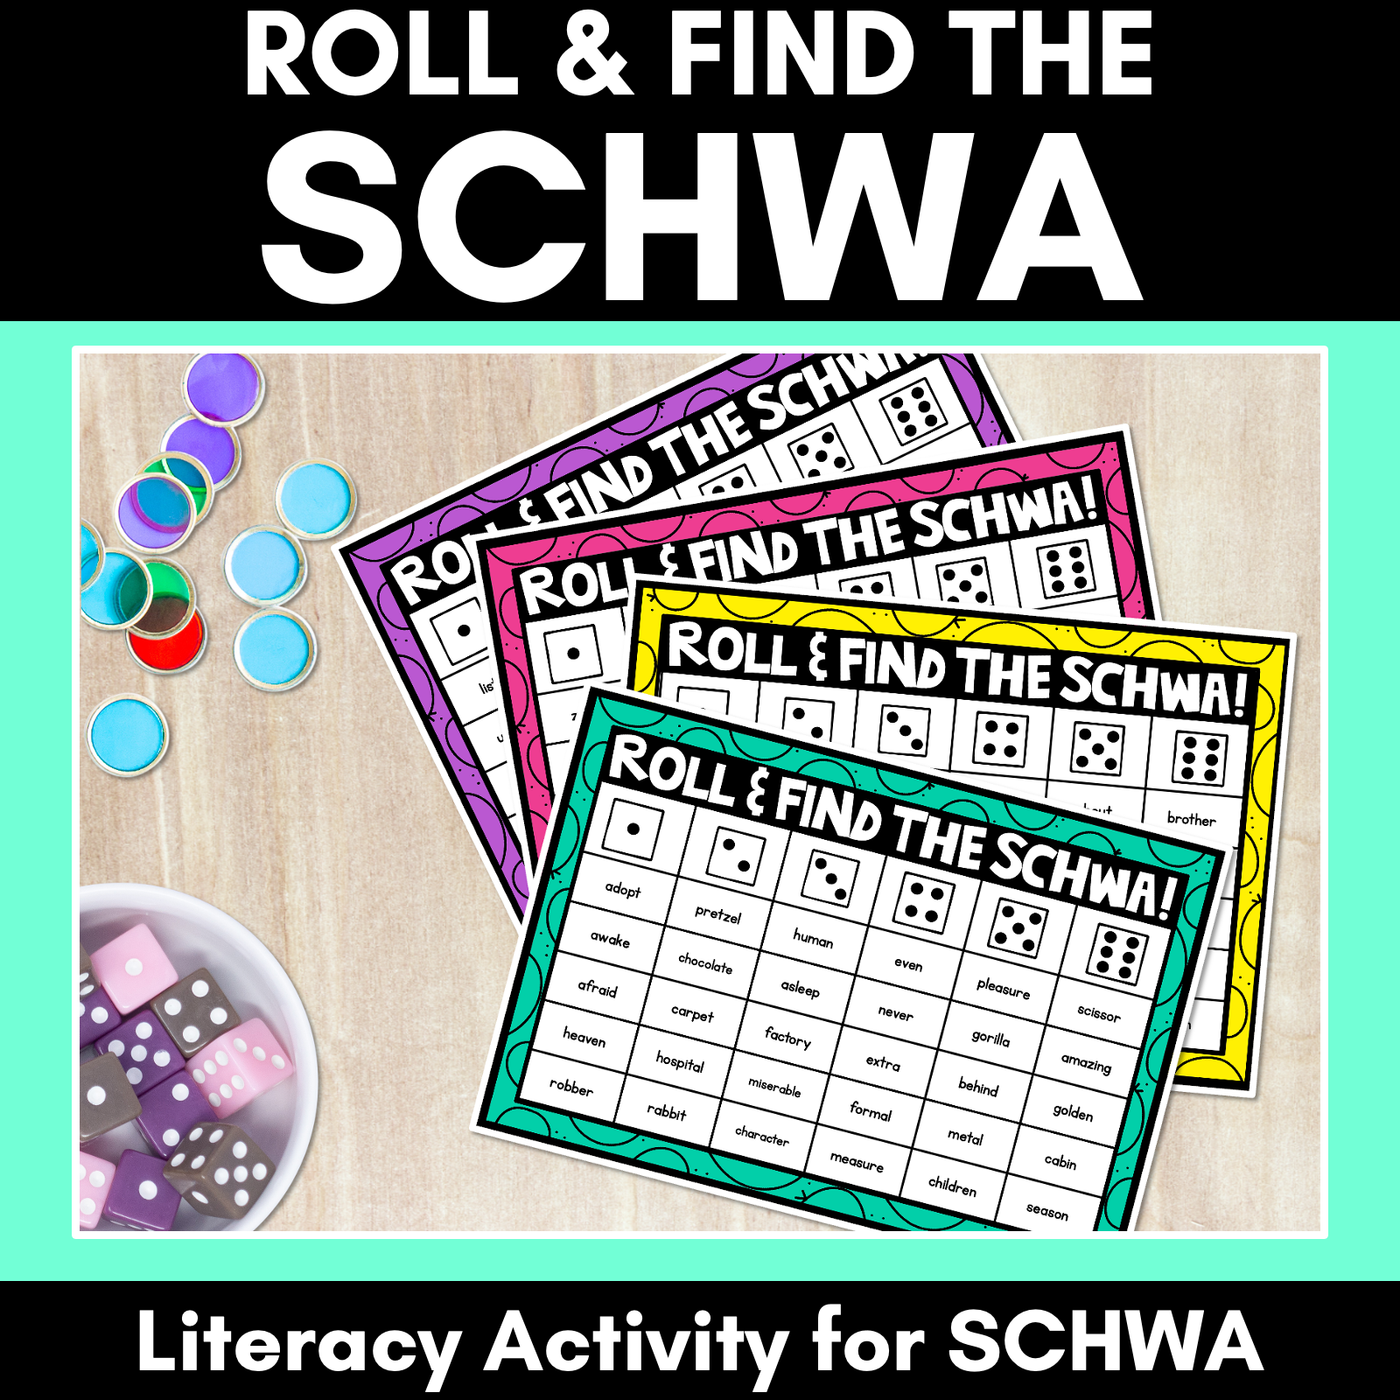 Schwa Game - Roll and find the schwa words